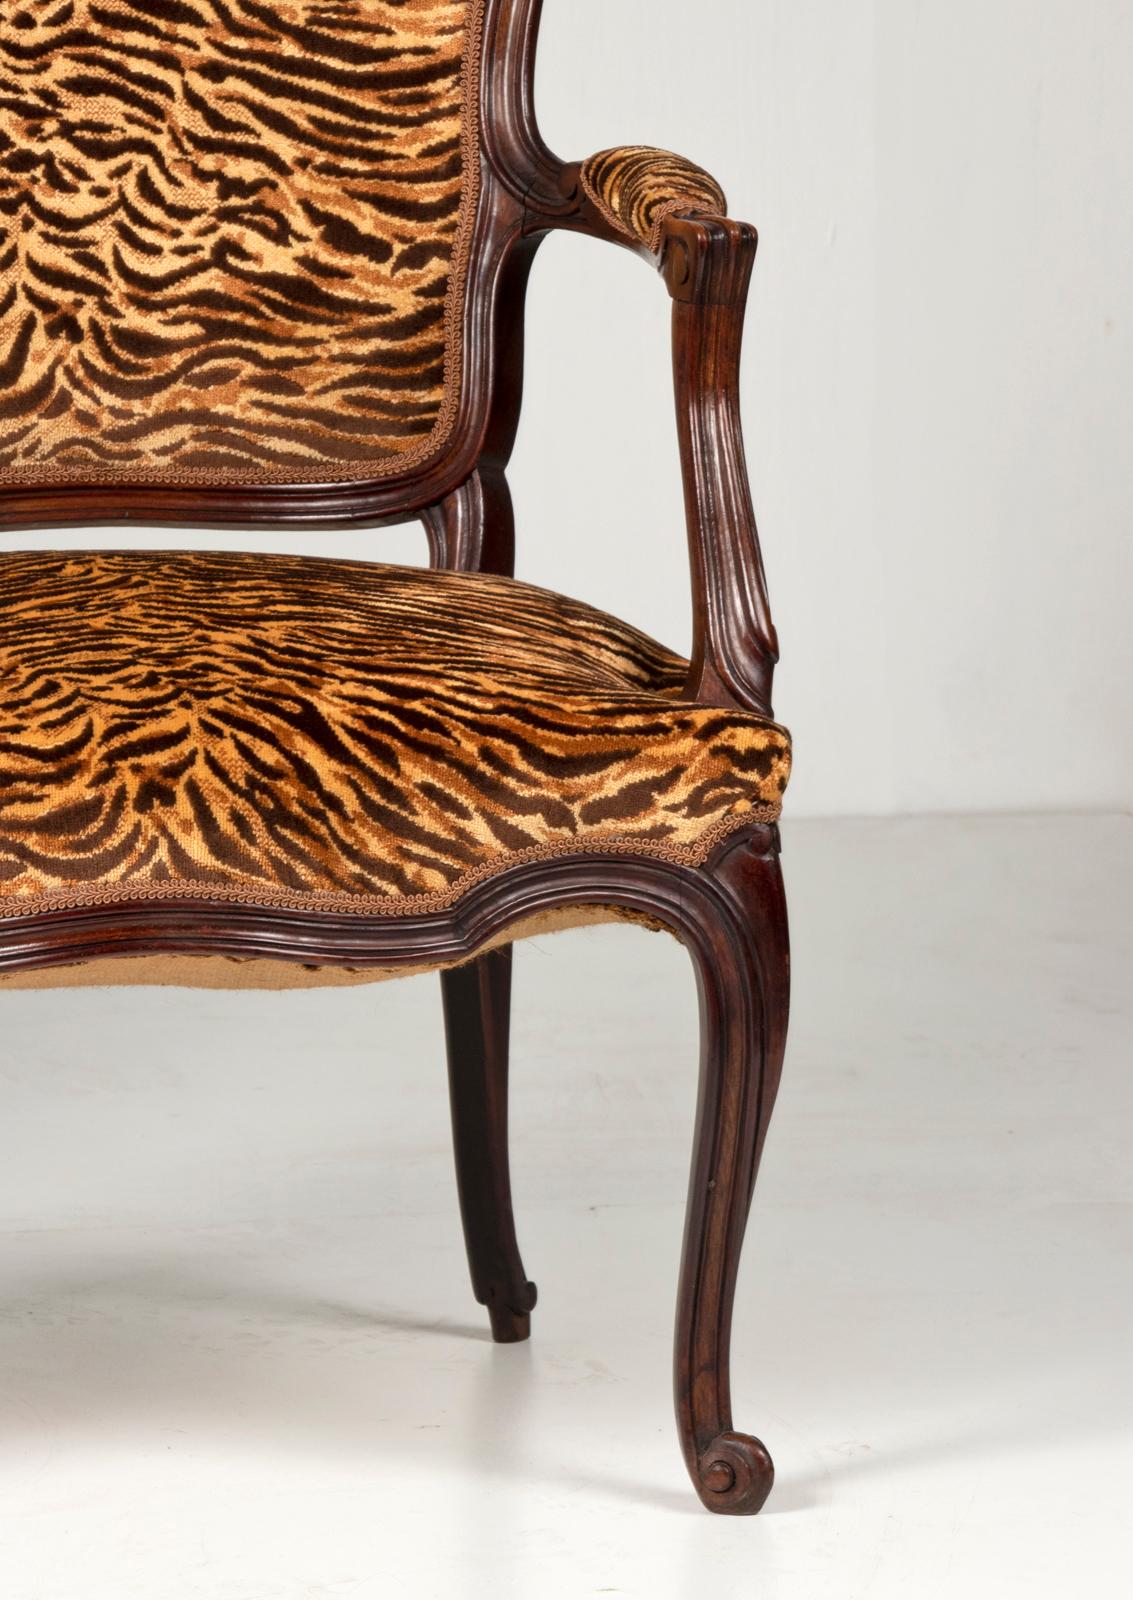 Pair of Early 20th Century French Cabriolet Arm Chairs with Tiger Print Fabric 1